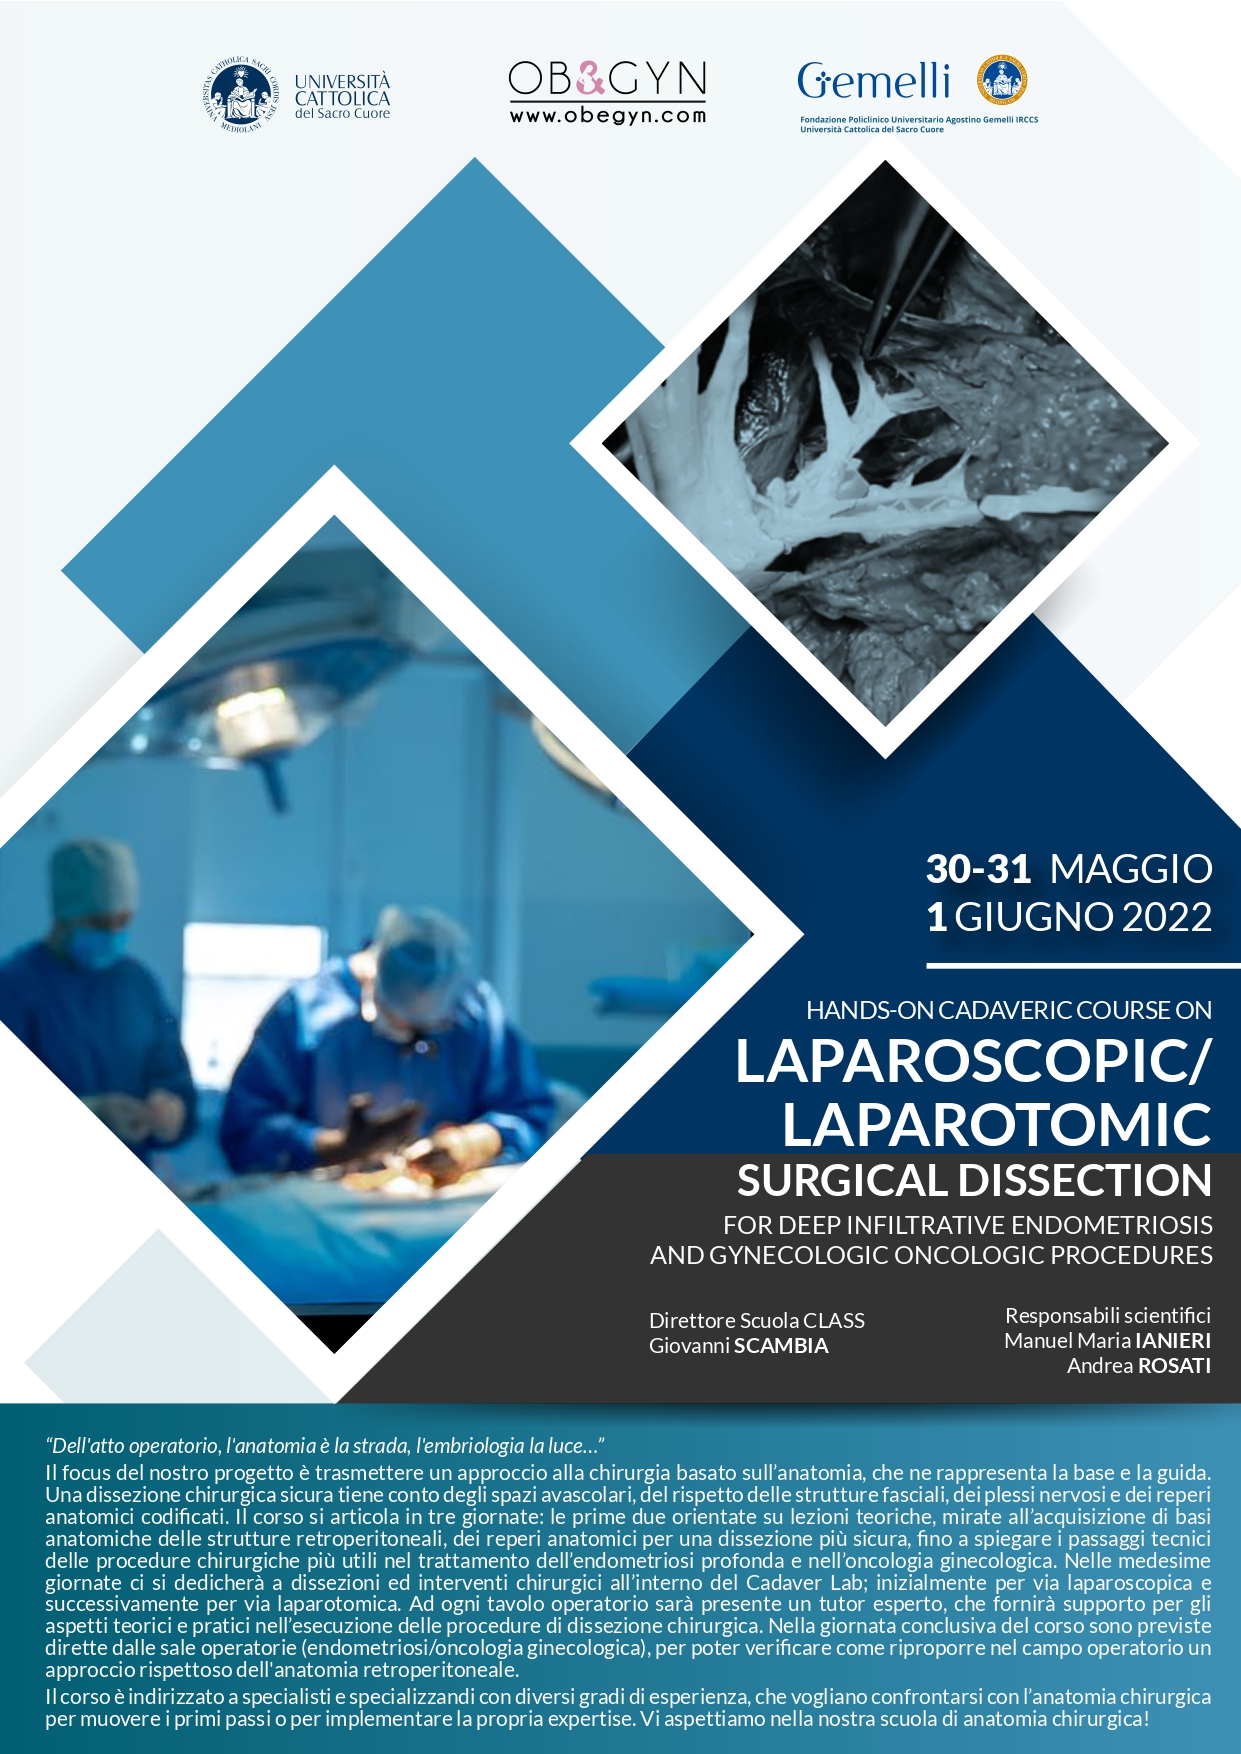 Programma HANDS-ON CADAVERIC COURSE ON LAPAROSCOPIC/LAPAROTOMIC SURGICAL DISSECTION FOR DEEP INFILTRATIVE ENDOMETRIOSIS AND GYNECOLOGIC ONCOLOGIC PROCEDURES